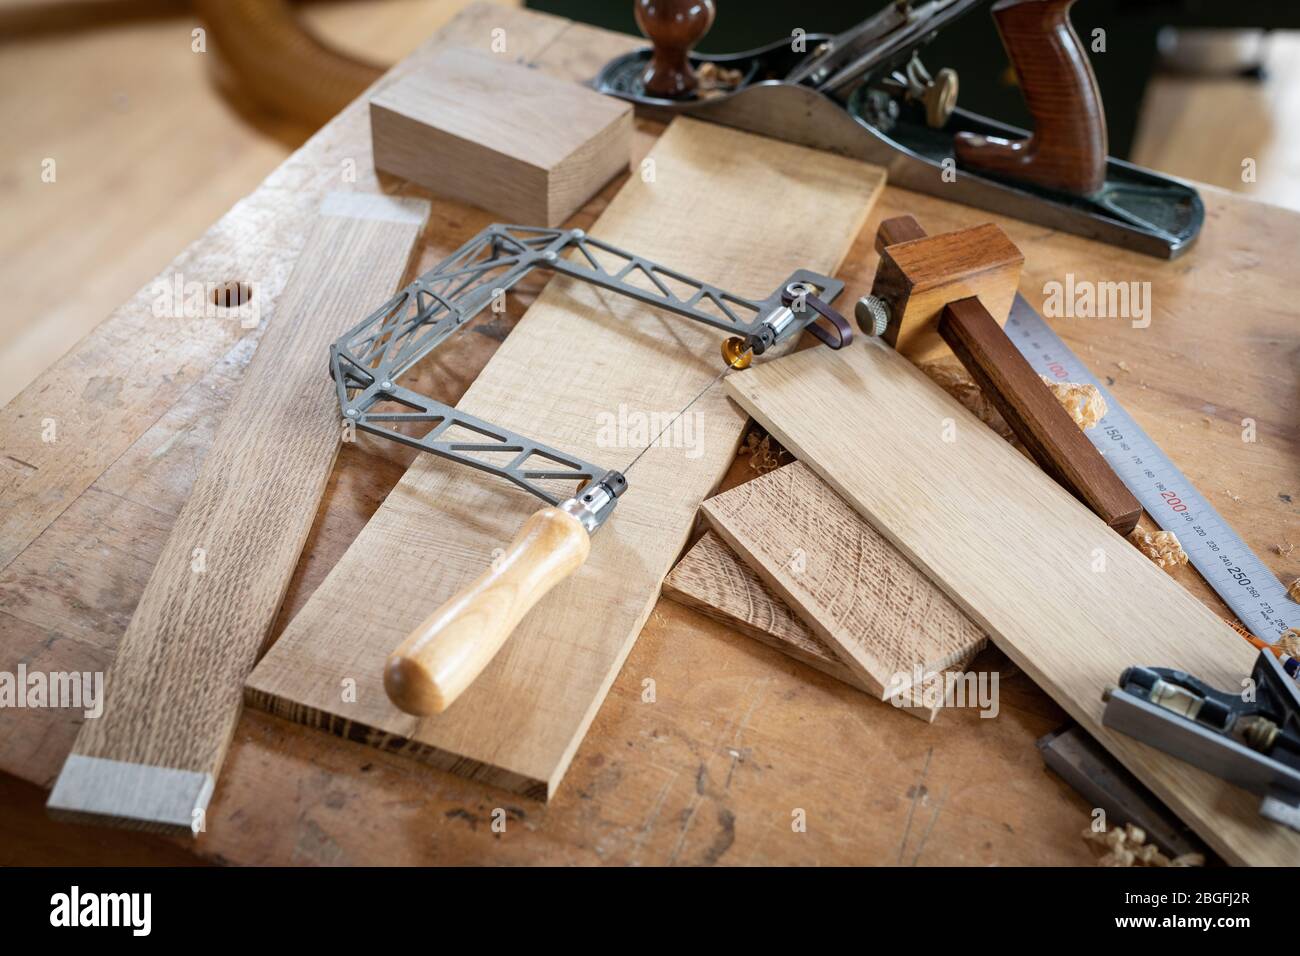 Carpentry tools on a workbench. Stock Photo